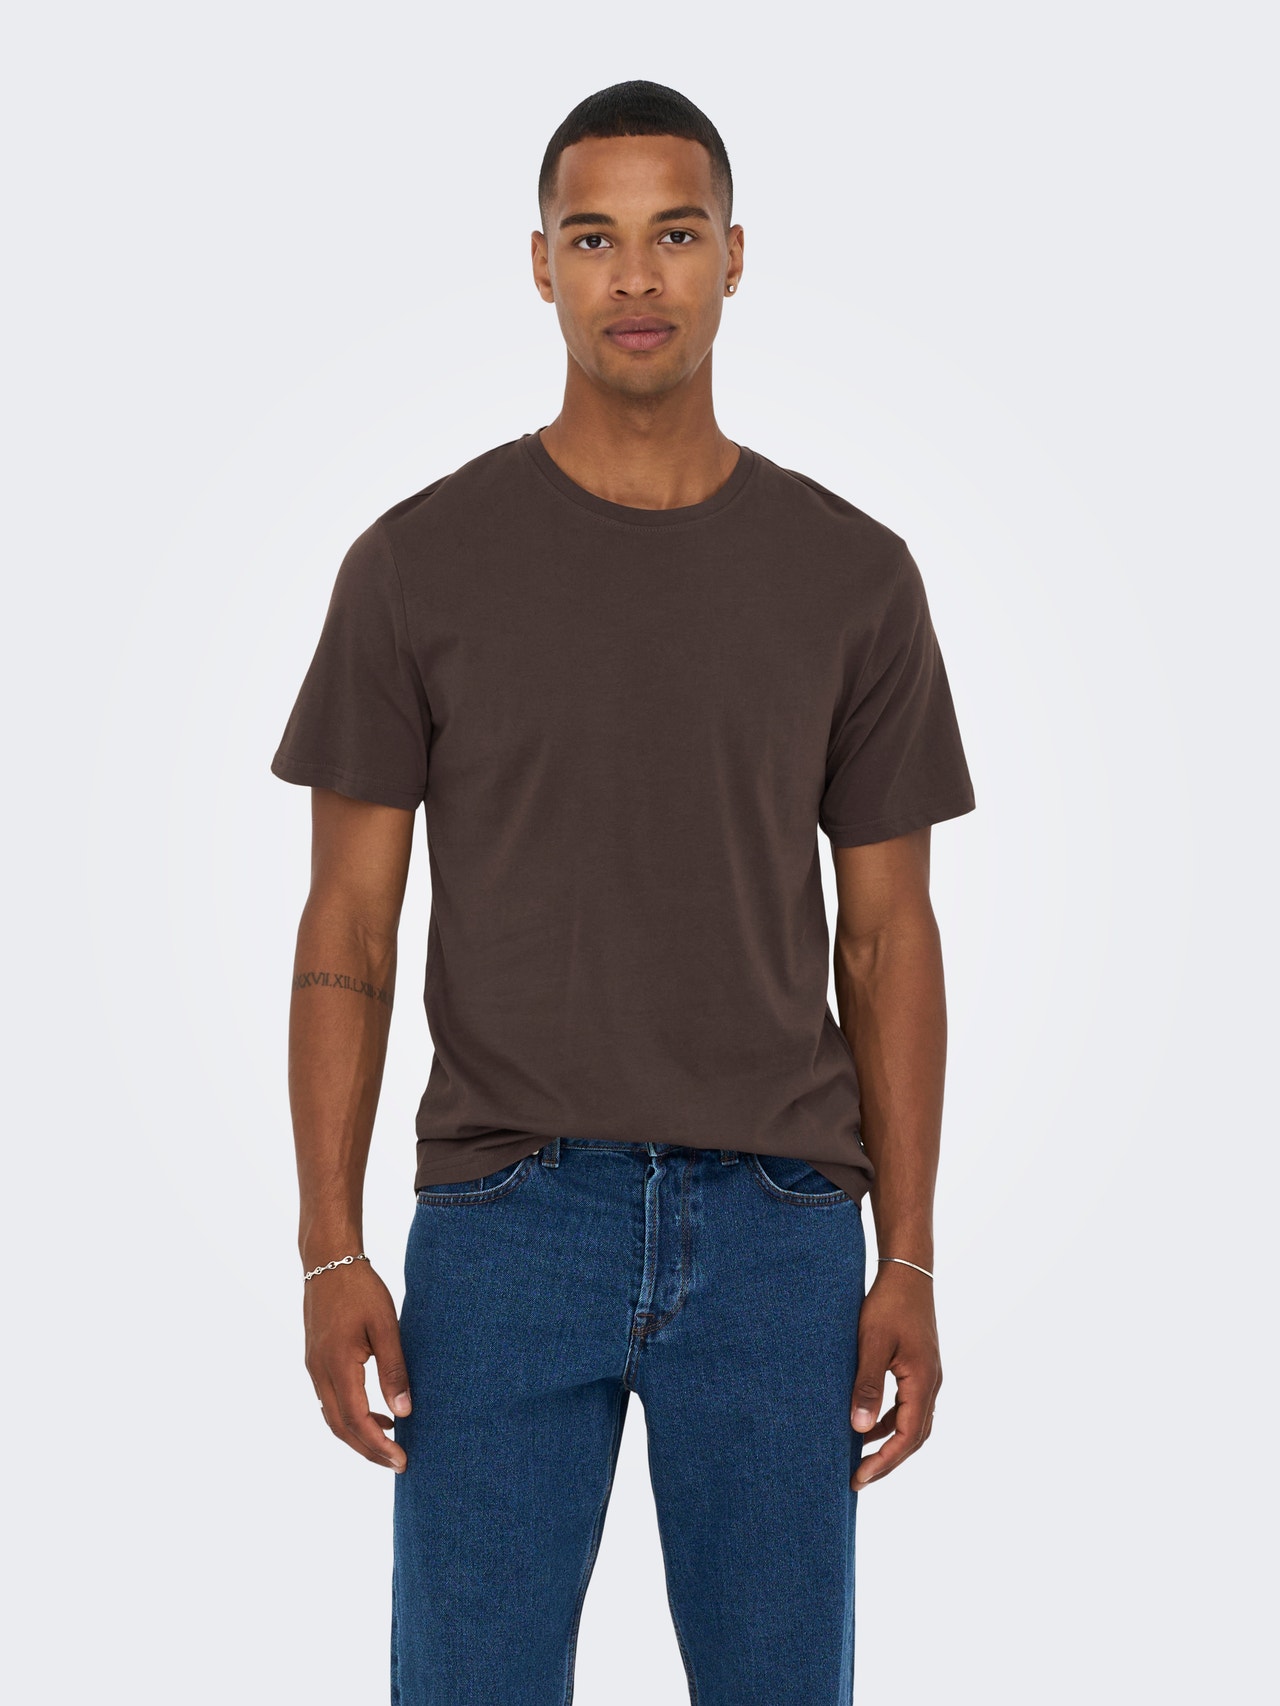 ONLY & SONS Long Line Fit Round Neck T-Shirt -Seal Brown - 22002973